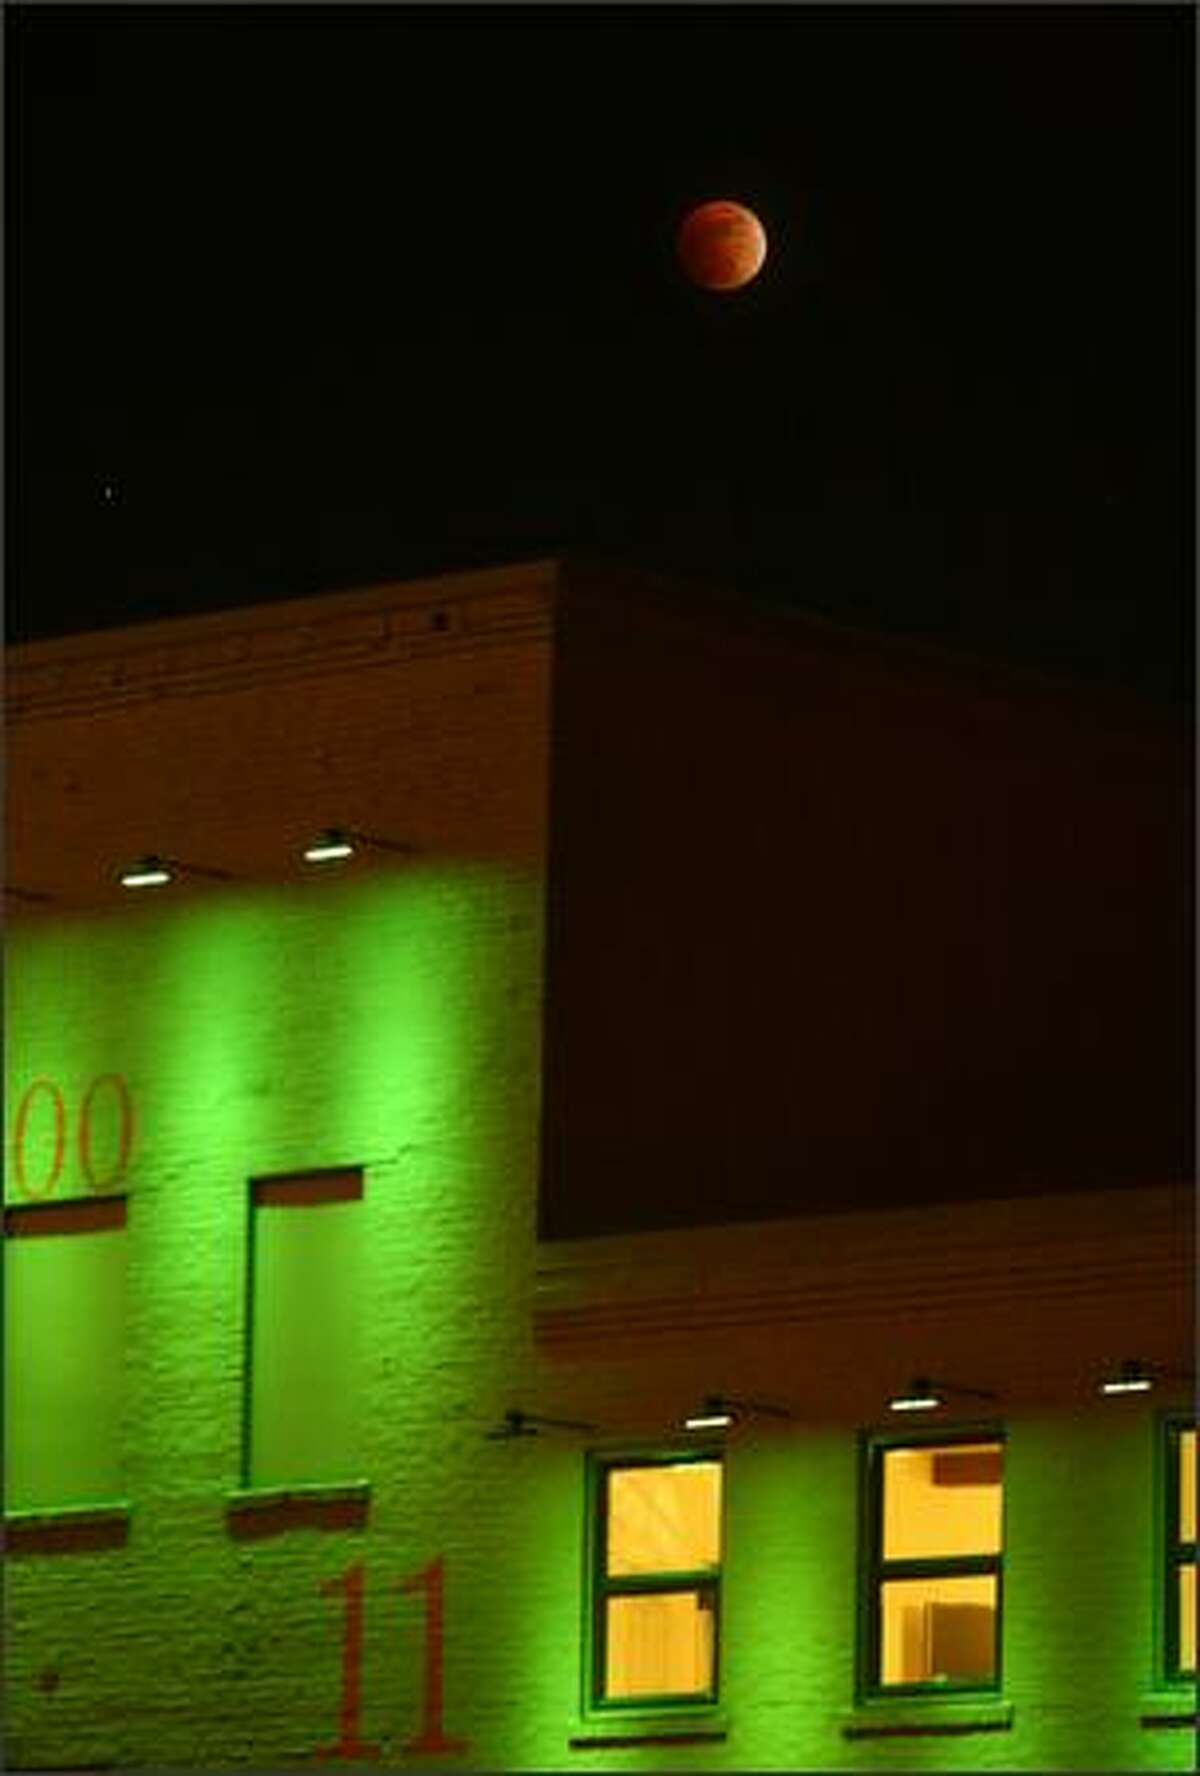 A lunar eclipse as seen above the X Gym building on Western Avenue in downtown Seattle Wednesday night, Feb. 20, 2008.